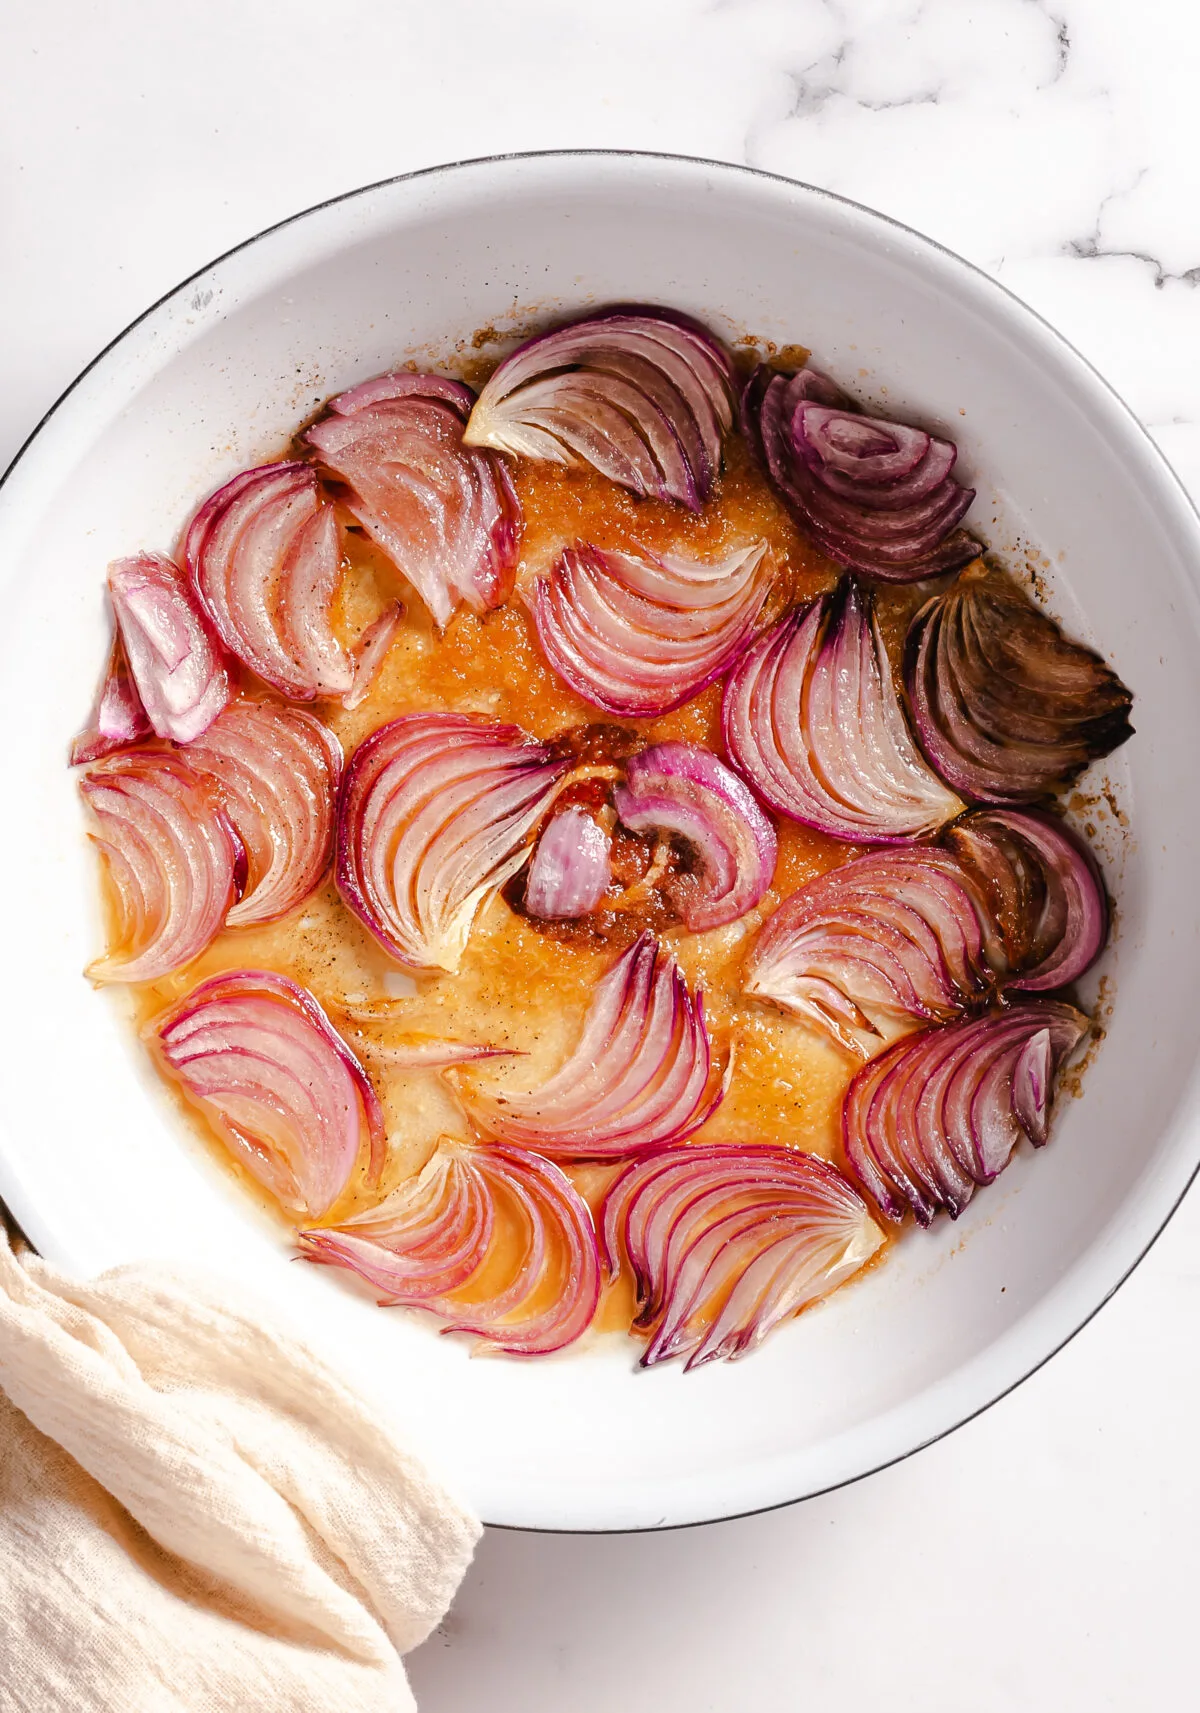 Red onion sliced and cooking in a large white skillet.